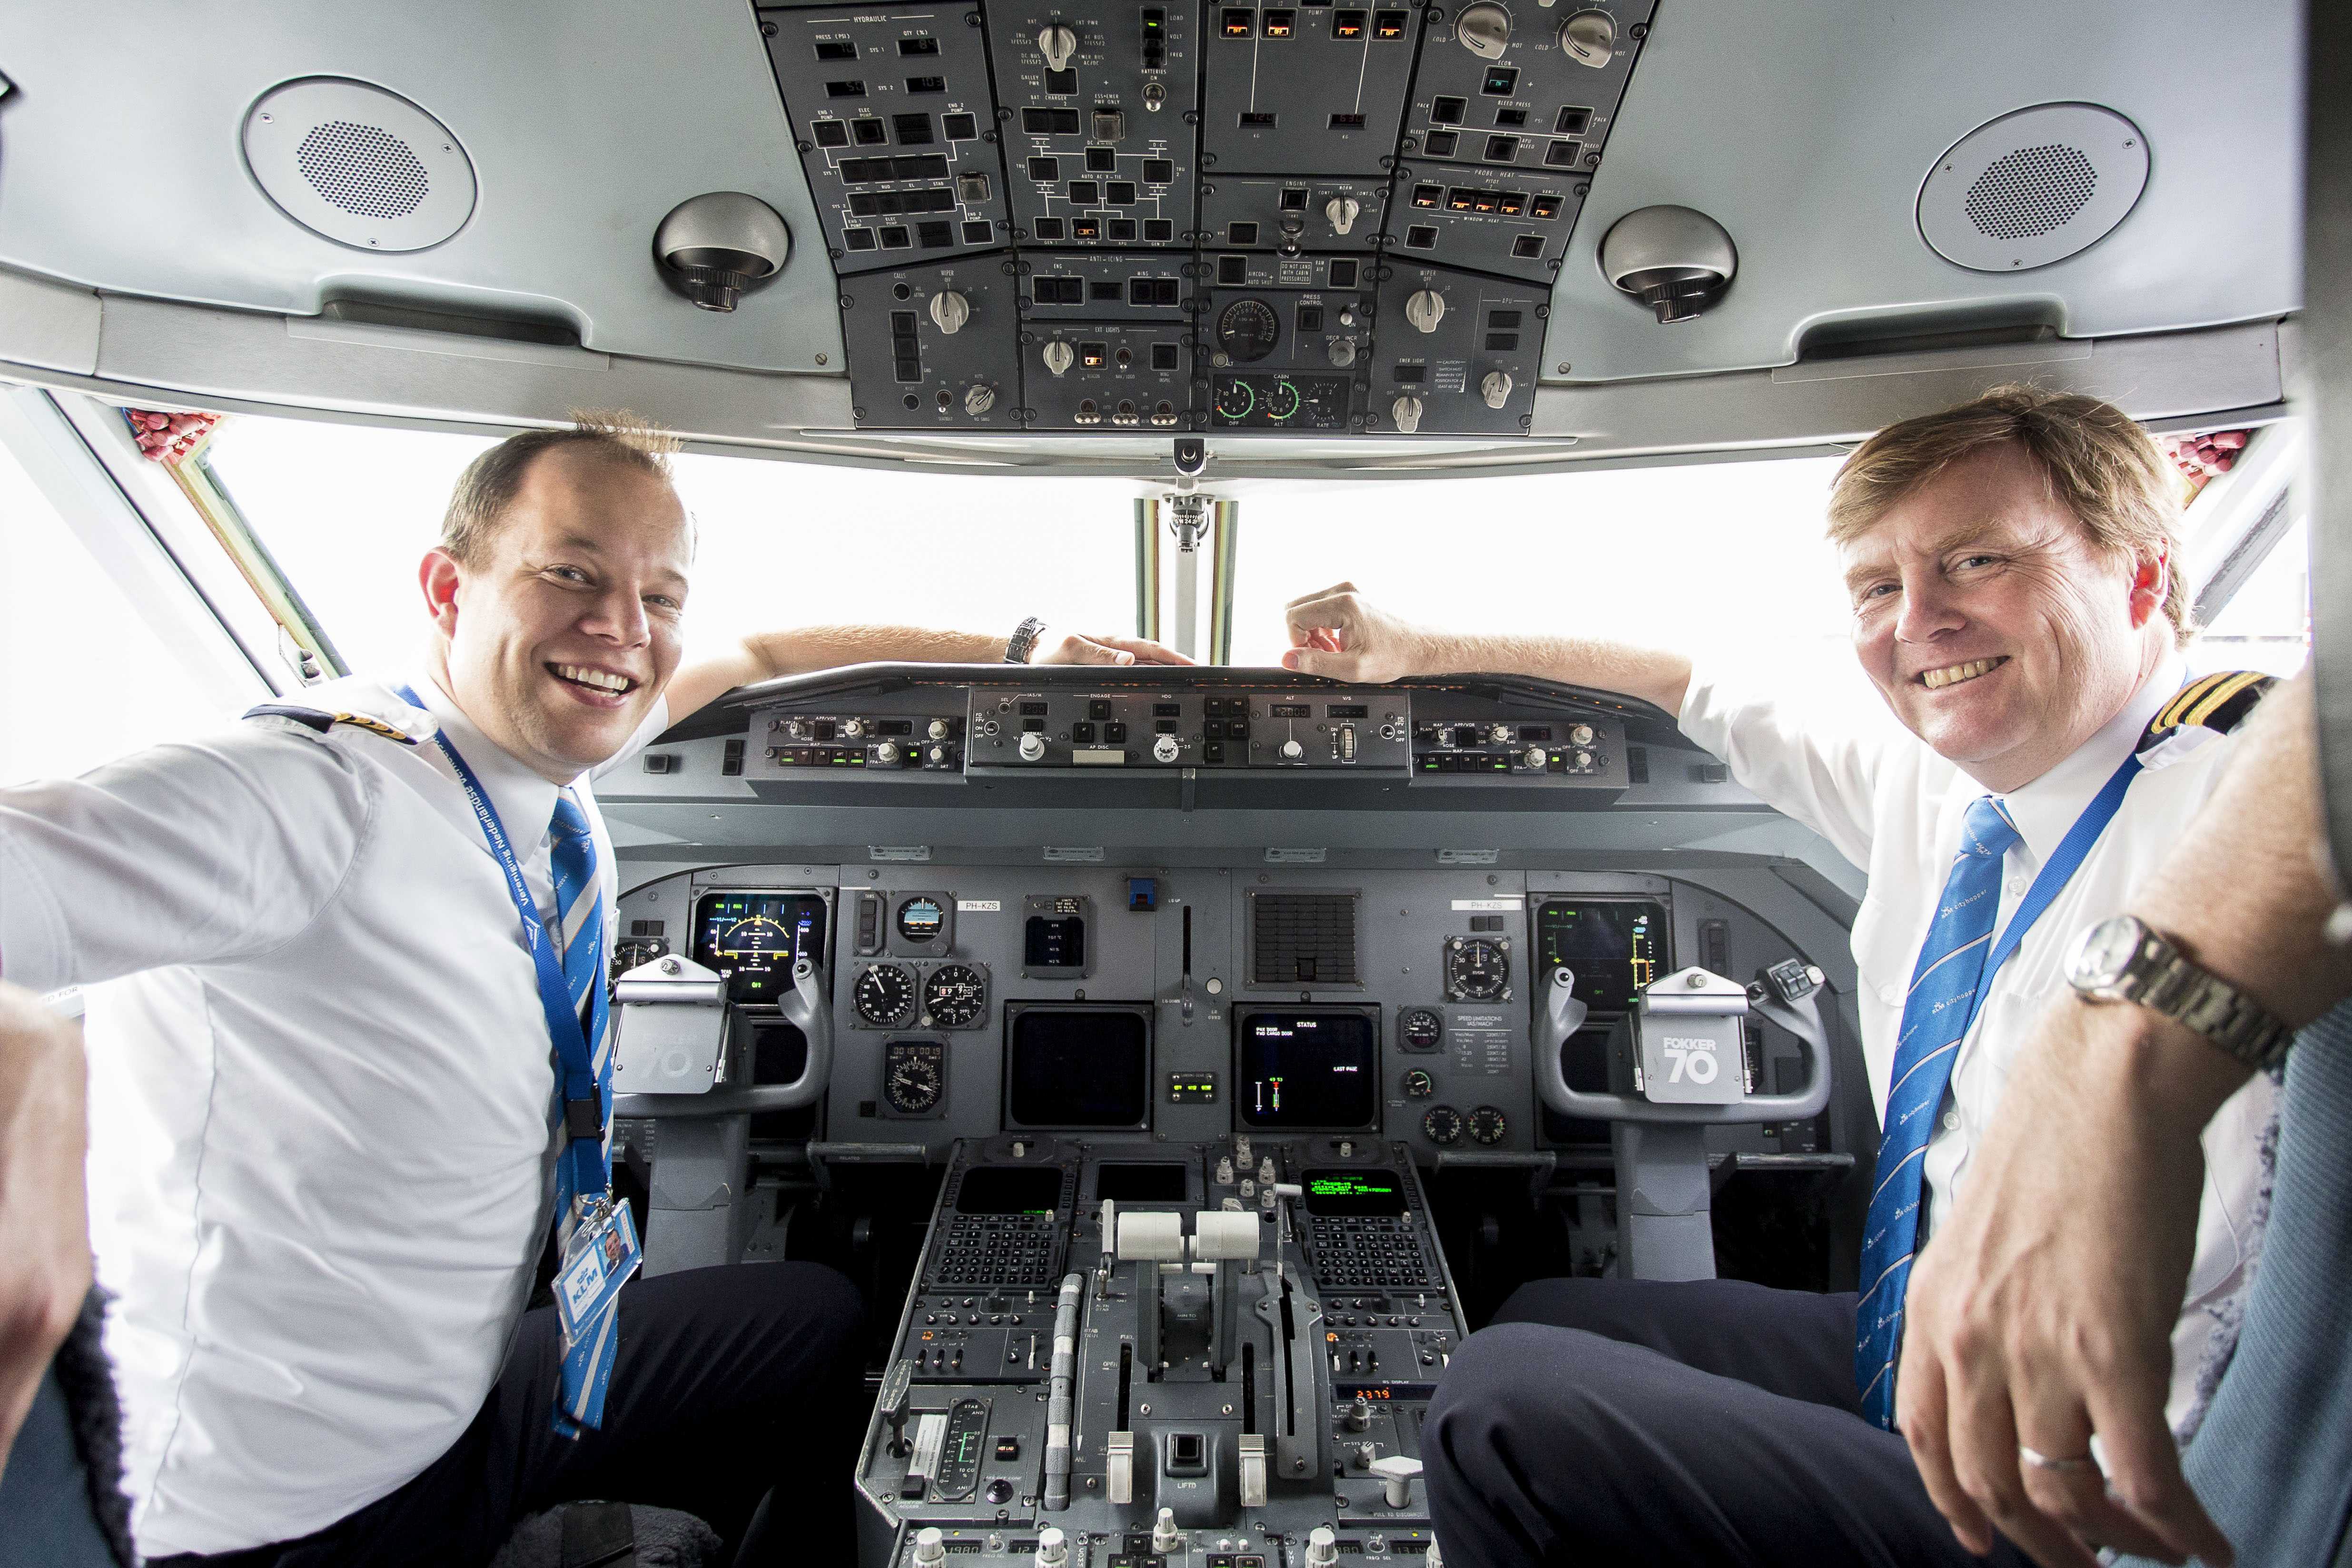 2017-05-16 13:00:00 epa05970375 A handout photo made available on 17 May 2017 by Dutch airline KLM shows King Willem-Alexander of The Netherlands (R) sitting next to pilot Maarten Putman (L) inside the cockpit of a KLM Cityhopper at Schipol Airport, Amsterdam, Netherlands, 16 May 2017. The Dutch king has been flying passengers anonimously with Cityhopper's Fokker crafts as a co-pilot next to pilot Maarten Putman for years. As KLM will discontinue Fokker Cityhoppers, the king will retrain to fly Boeing 737 aircrafts in the future. EPA/NATASCHA LIBBERT HANDOUT HANDOUT EDITORIAL USE ONLY/NO SALES/NO ARCHIVES